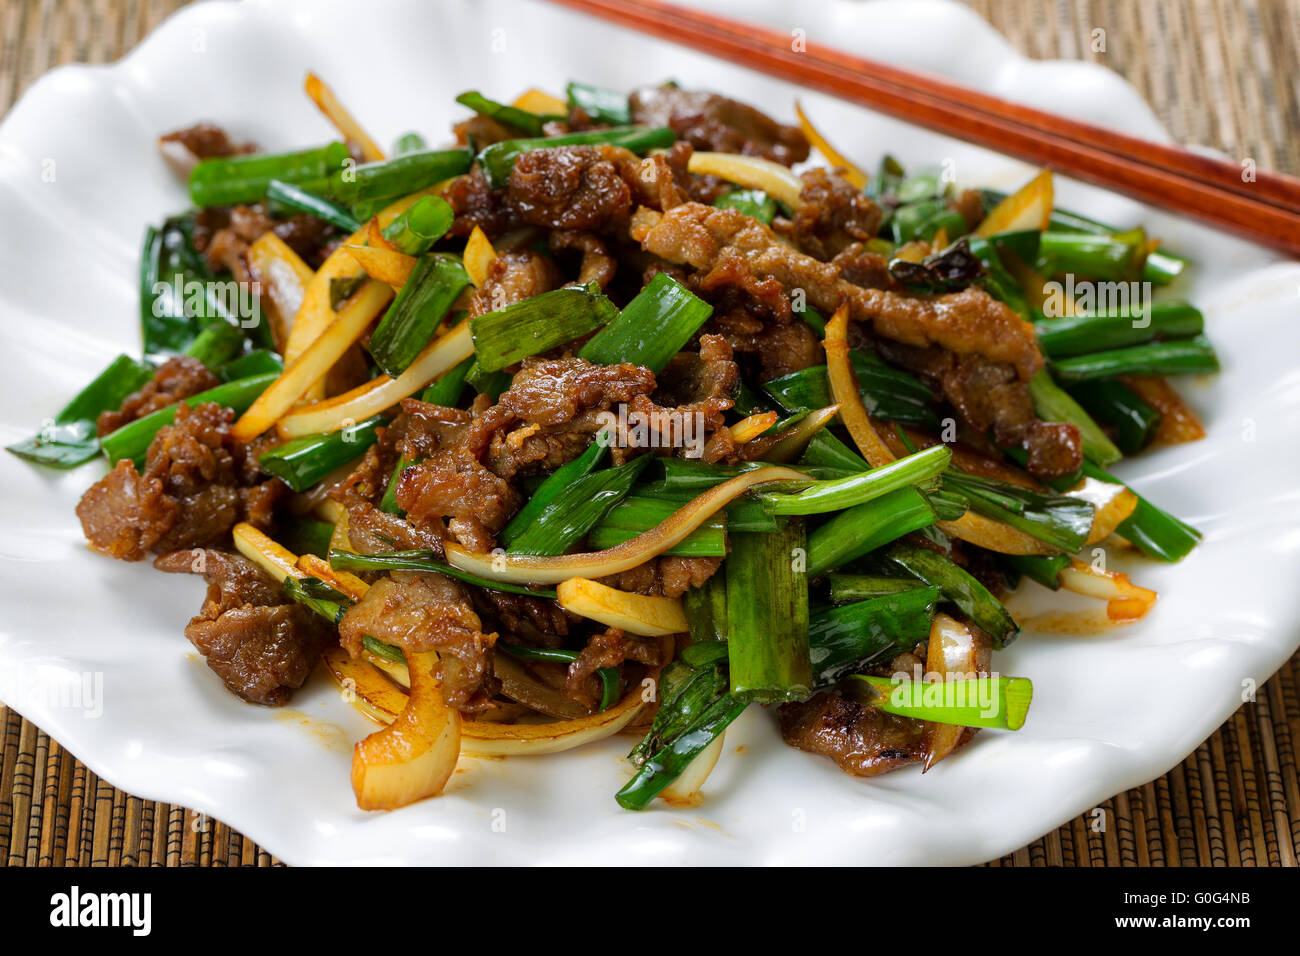 Fresh beef and green onion dish ready to eat Stock Photo